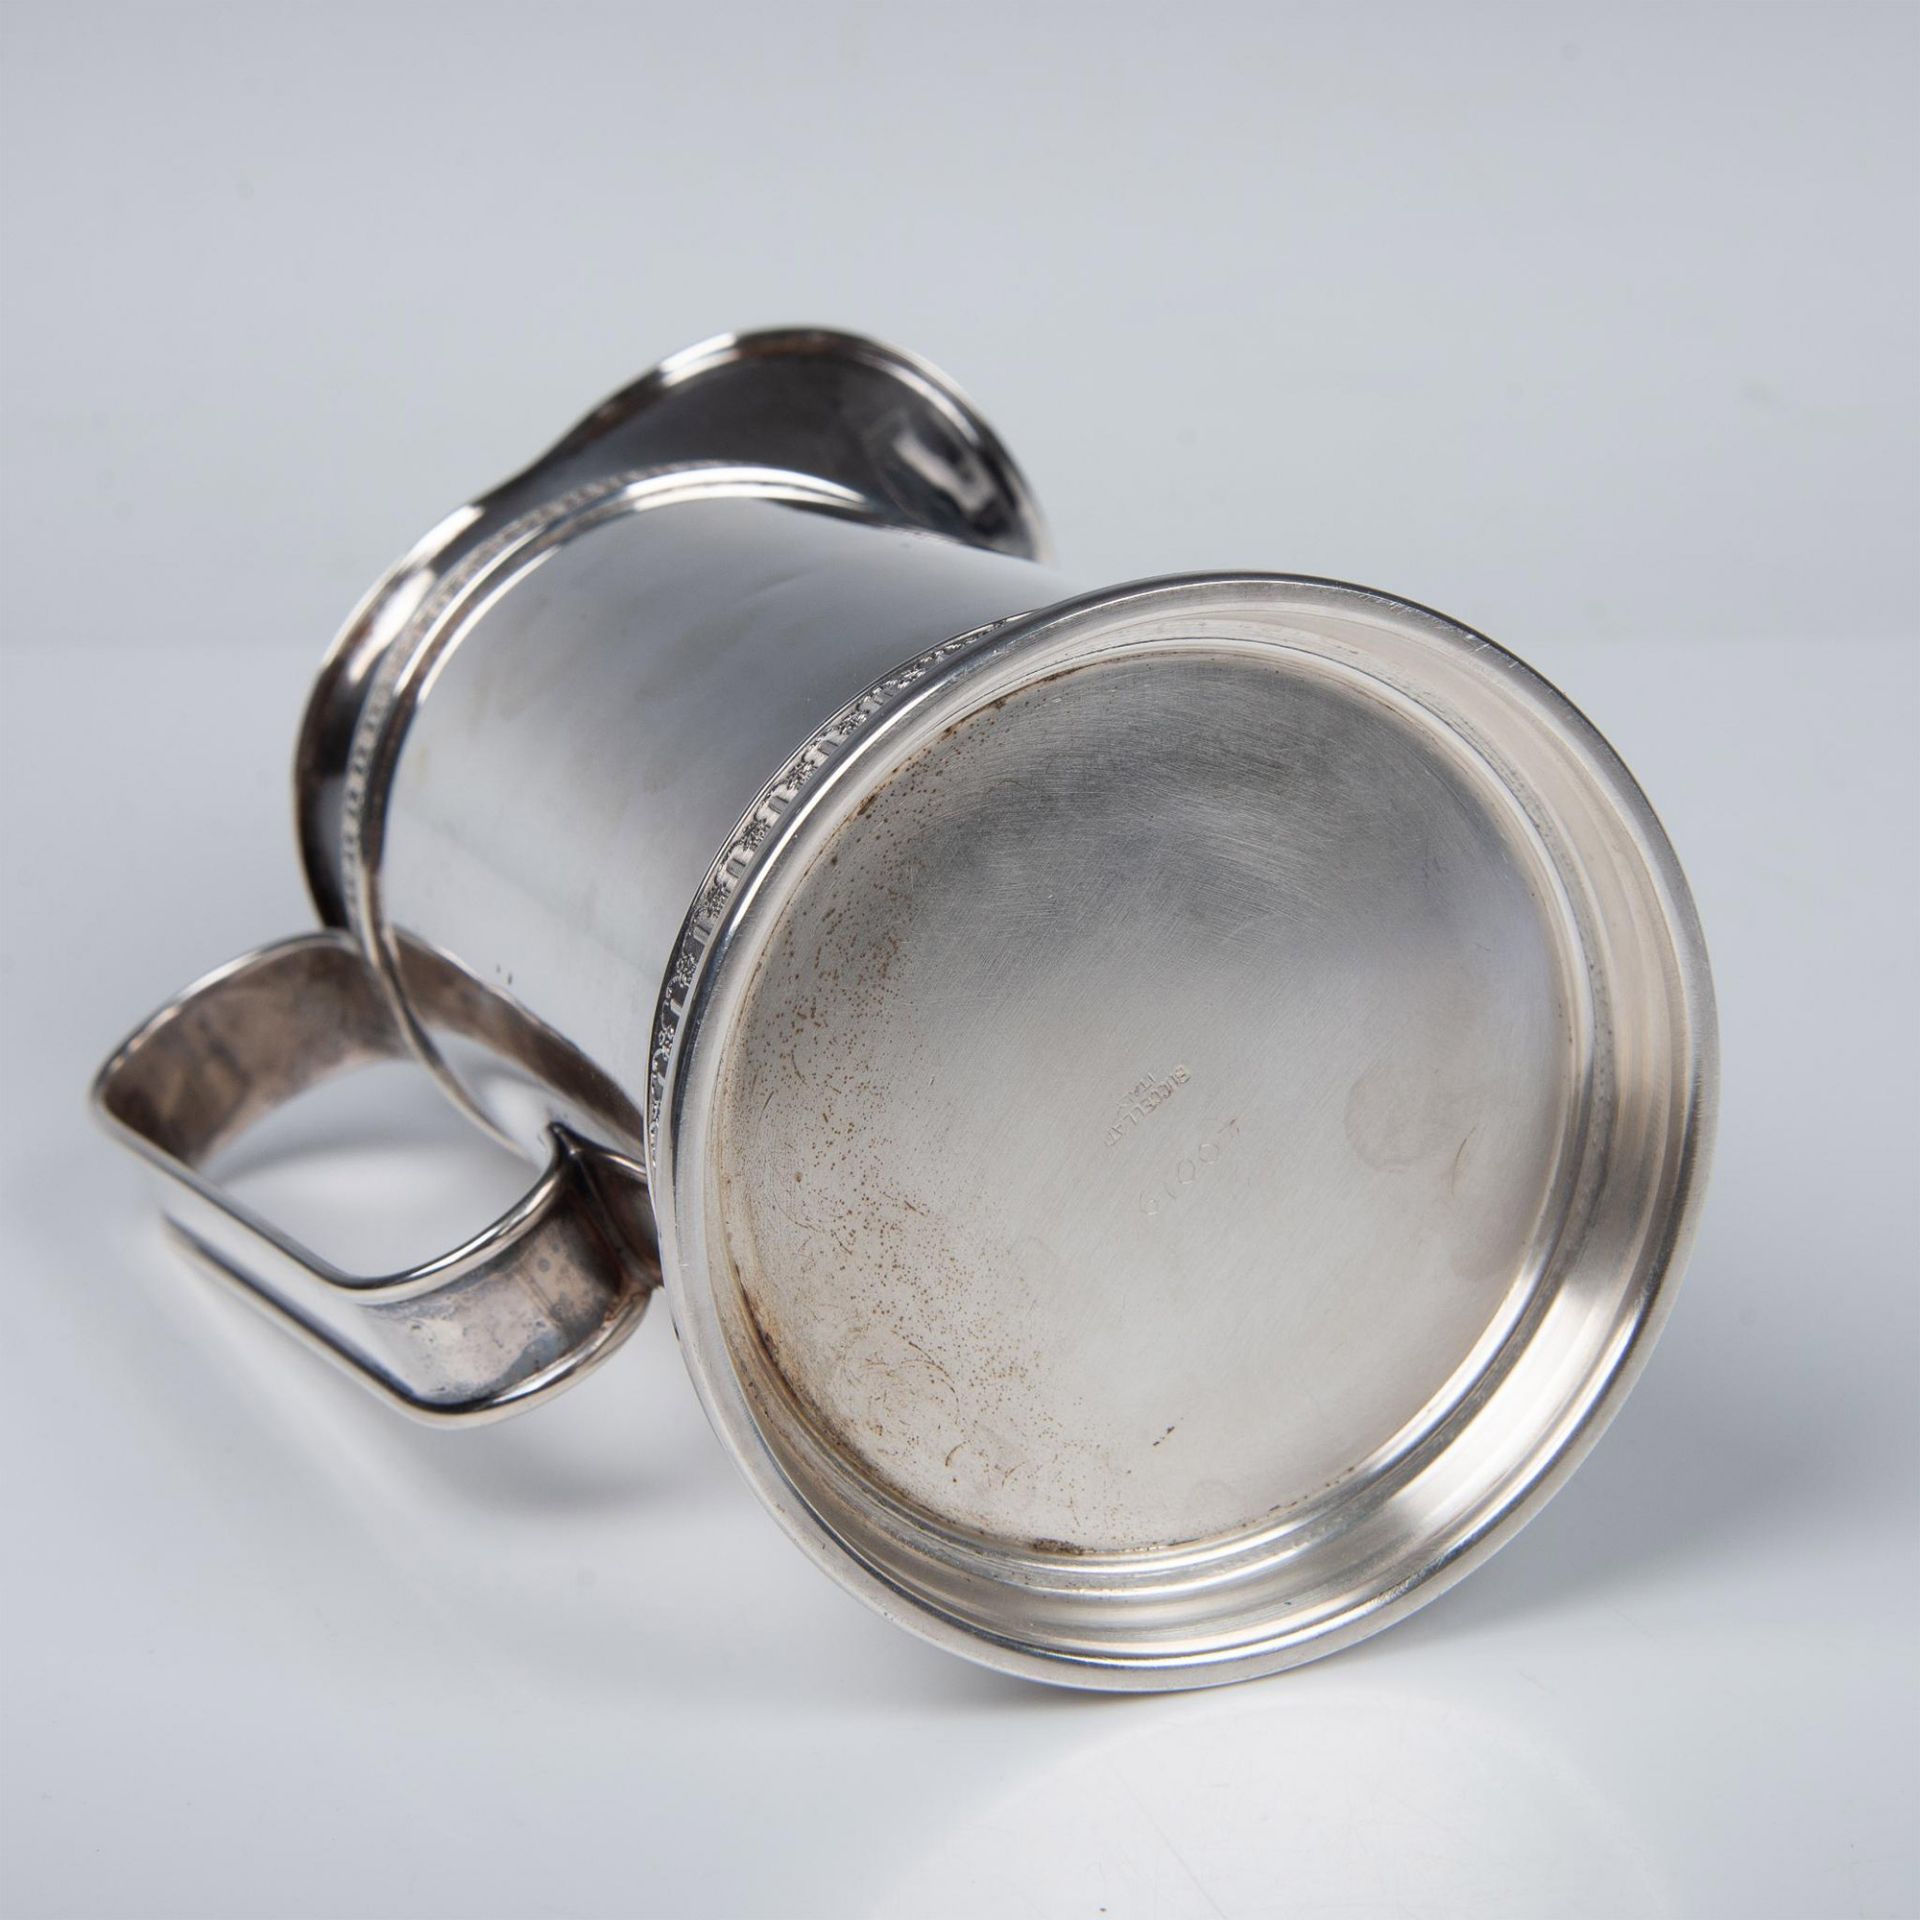 Buccellati Italy Silverplate Pitcher - Image 5 of 6